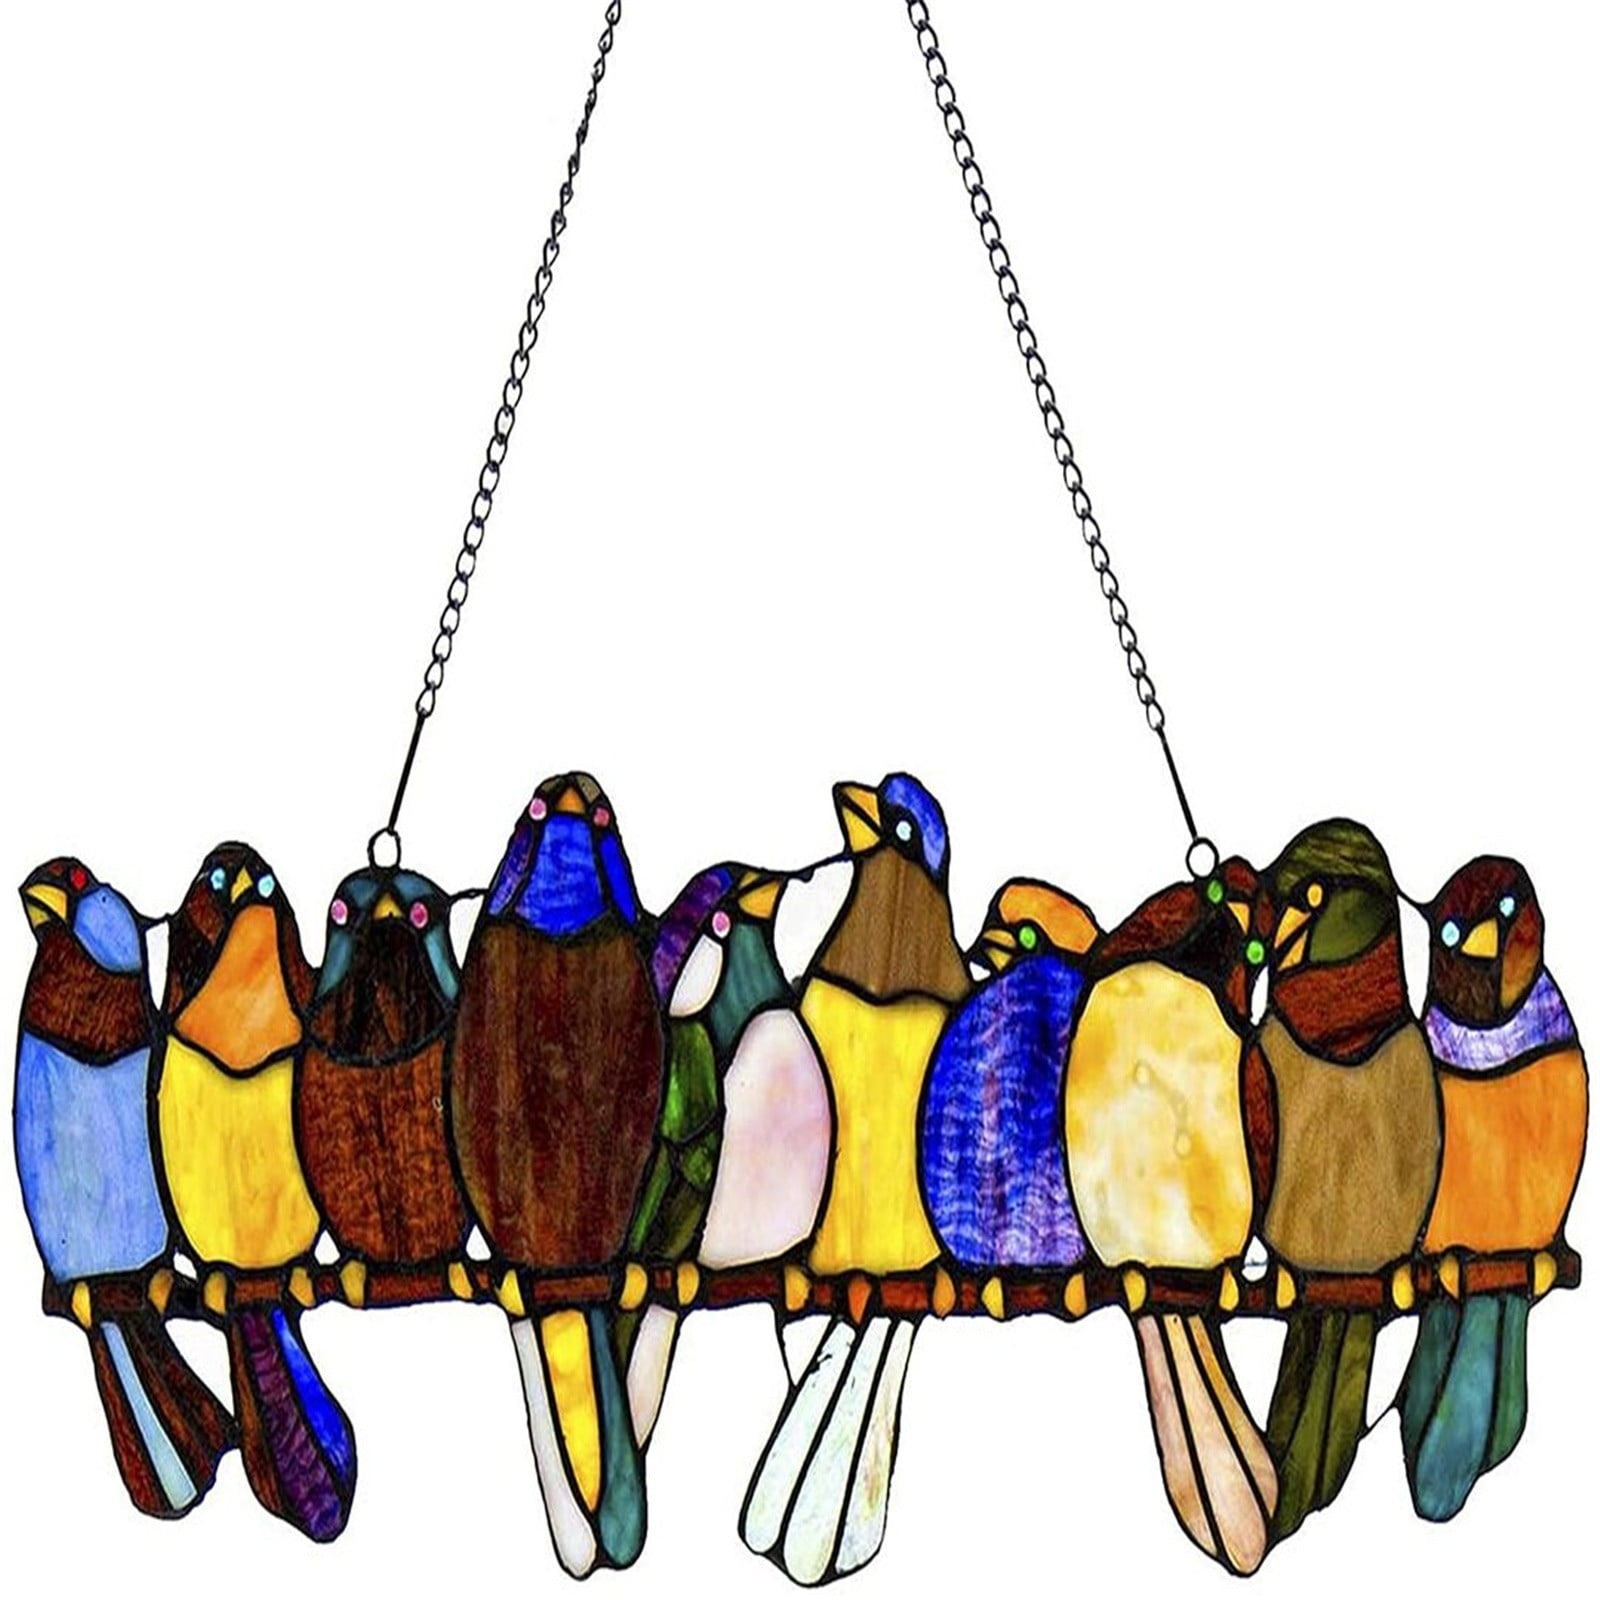 A TIANXIN River of Goods Birds on a Wire 9.8 Inch High Stained Glass Suncatcher Window Panel Bird Species Stained Pendant Window Hanging Suncatcher Acrylic Birds Hanging Multicolor 